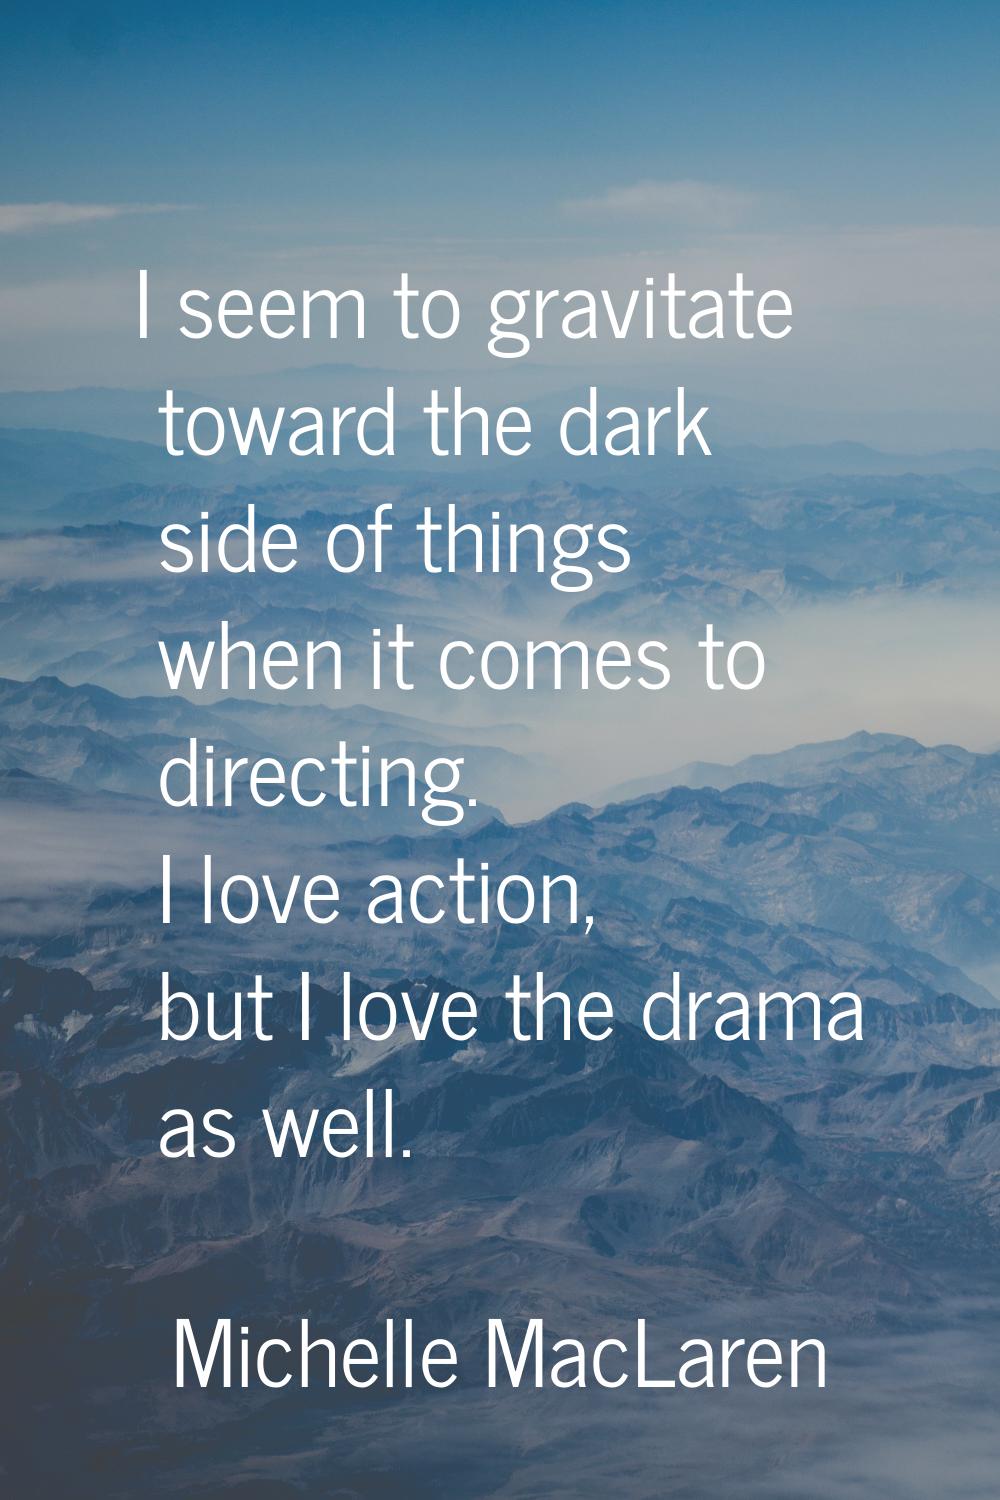 I seem to gravitate toward the dark side of things when it comes to directing. I love action, but I